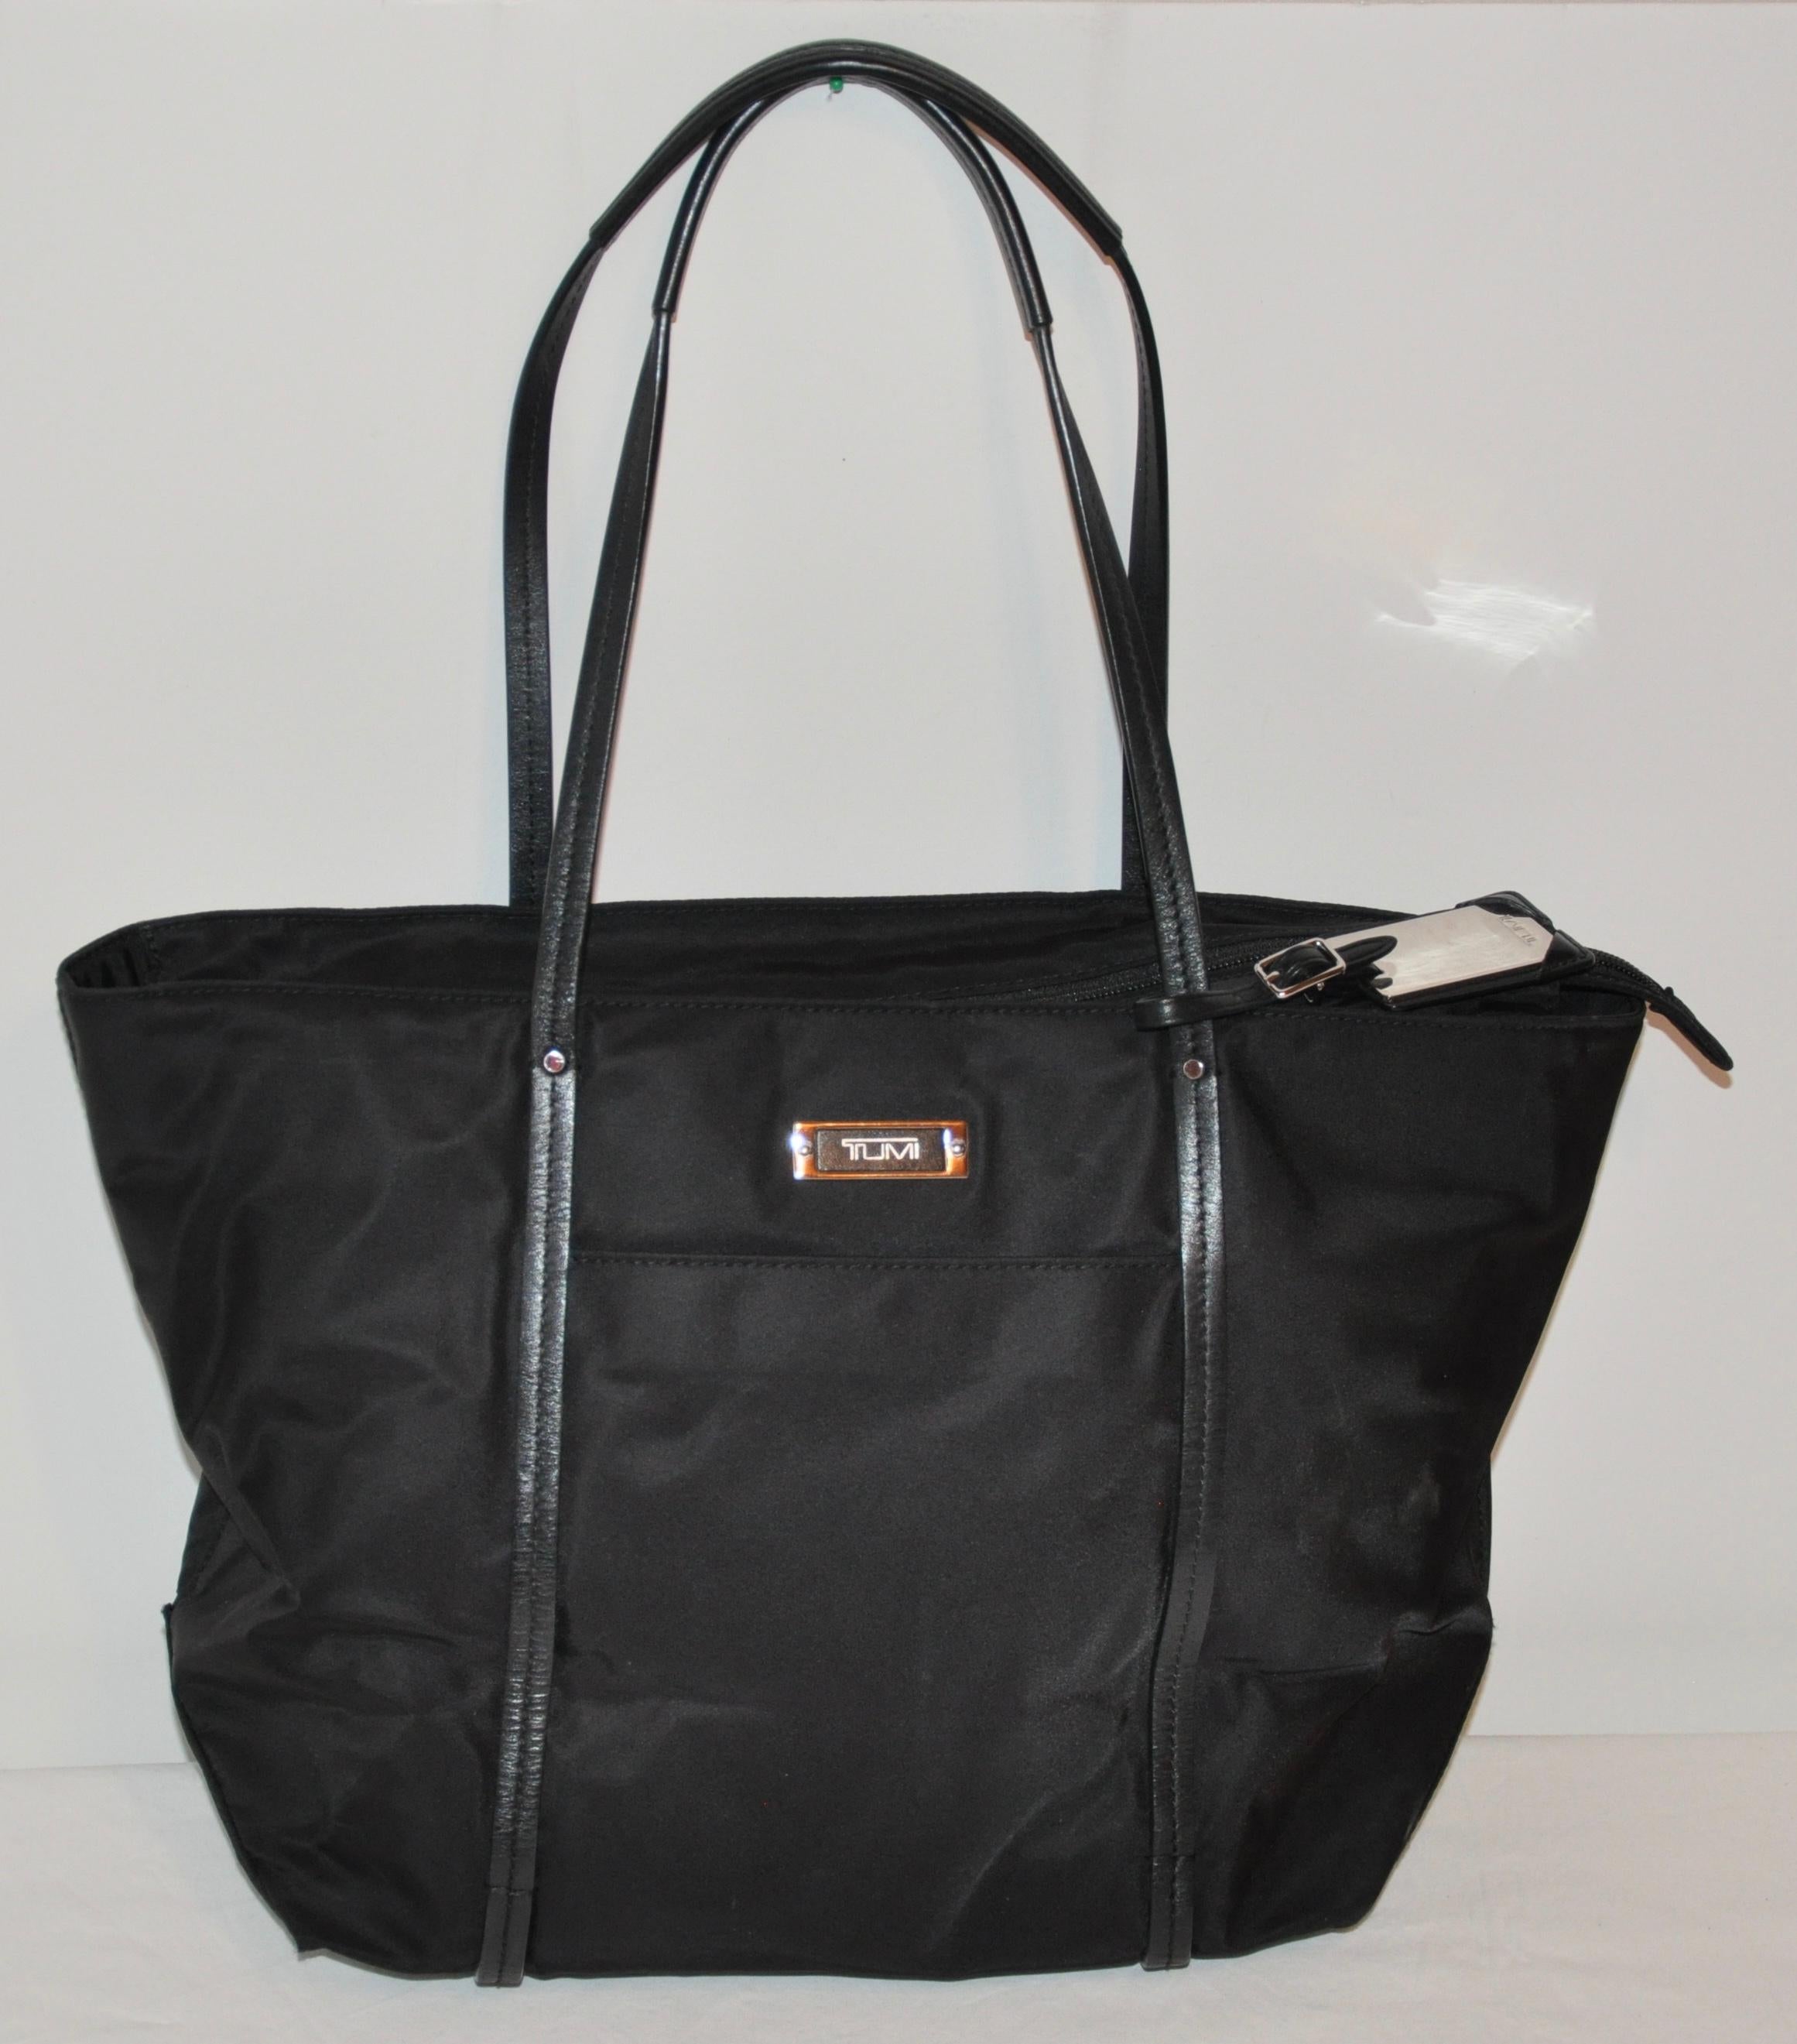      Tumi Black Nylon accented with black calfskin double handle tote measures 16 inches by 5 1/2 inches. Height measures 10 1/2 inch, the double handle straps measures 9 inches in height. Made in United States.